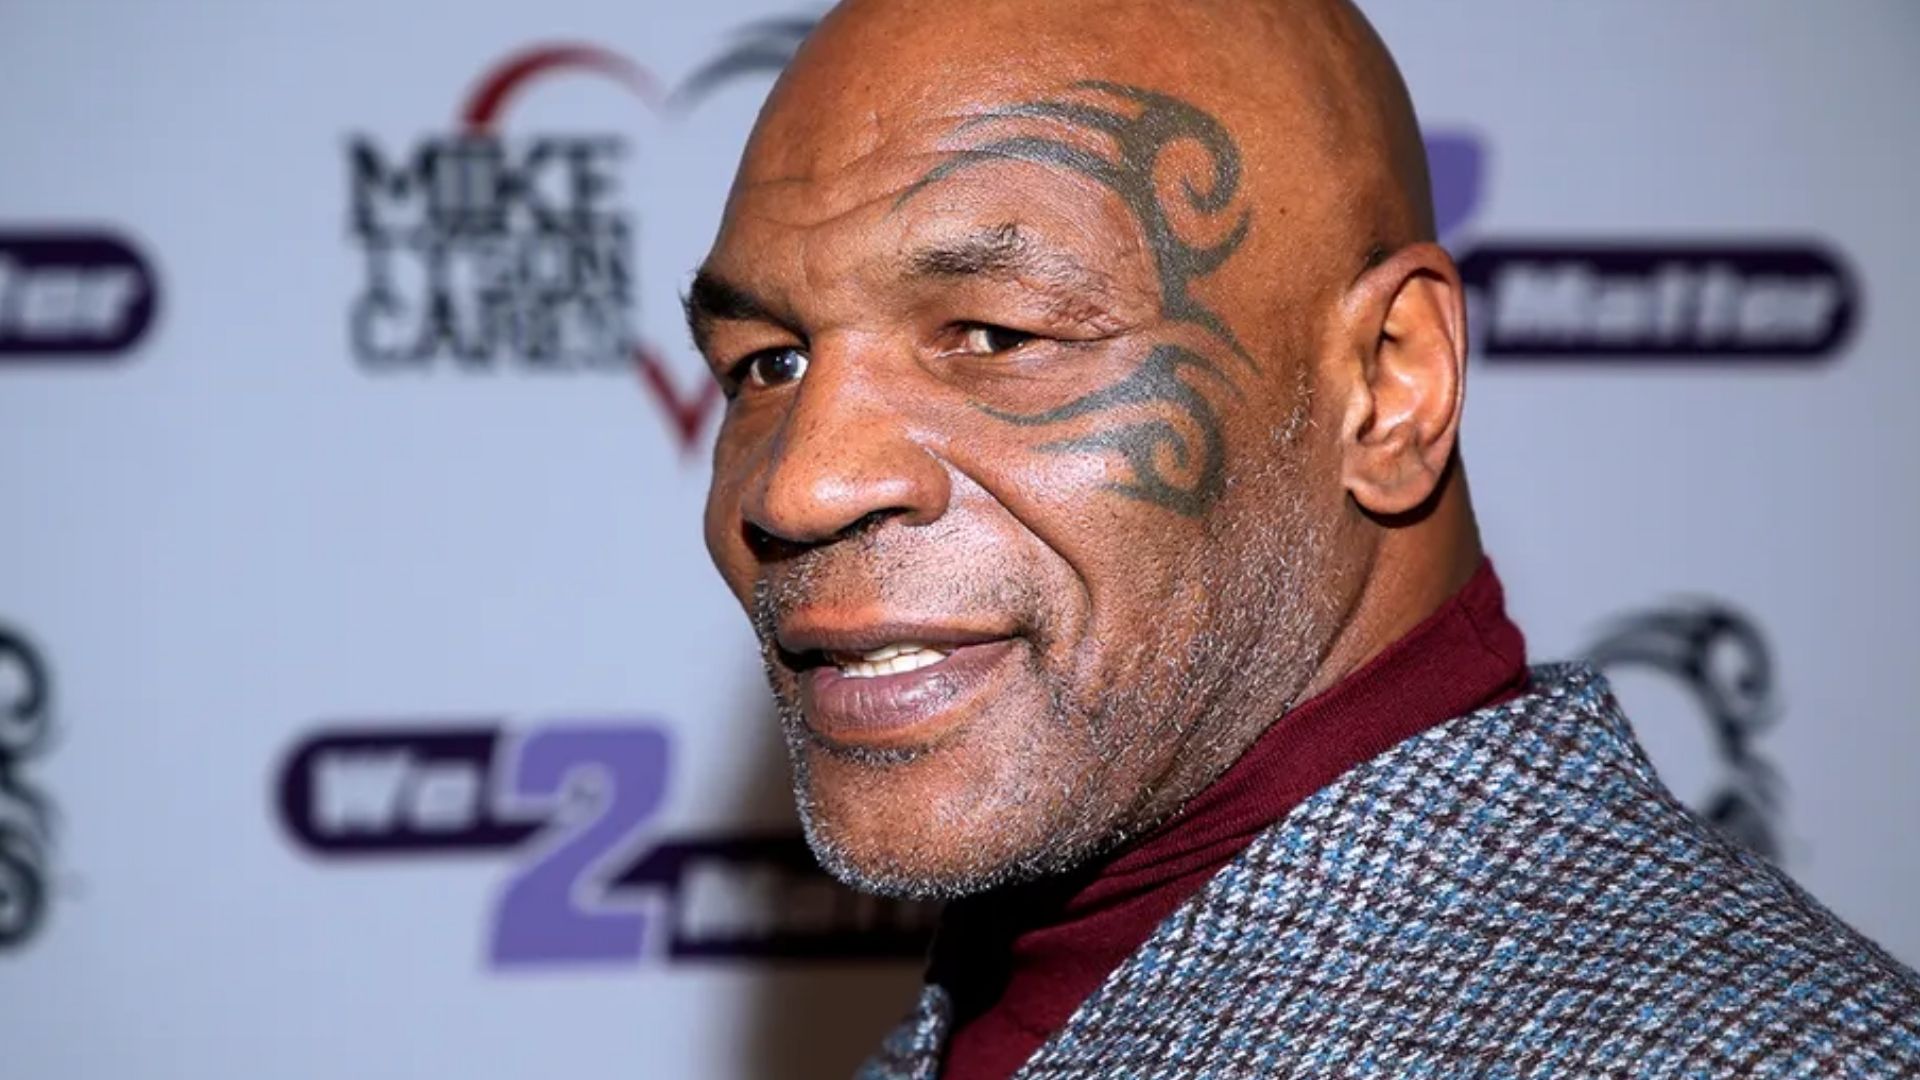 Mike Tyson has been acquitted of plane punching charges